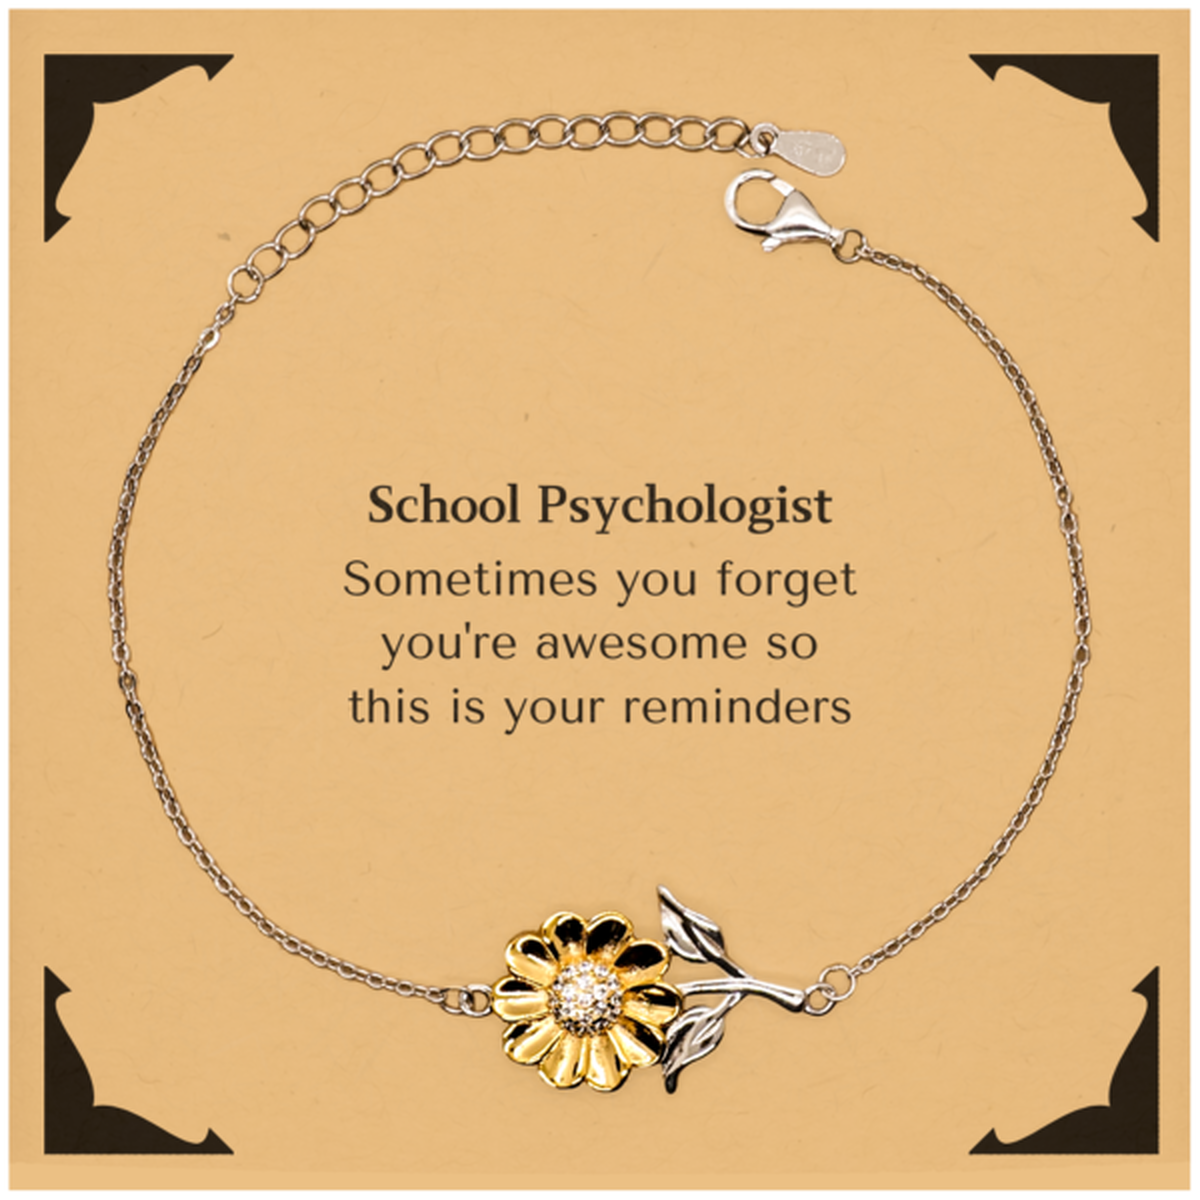 Sentimental School Psychologist Sunflower Bracelet, School Psychologist Sometimes you forget you're awesome so this is your reminders, Graduation Christmas Birthday Gifts for School Psychologist, Men, Women, Coworkers